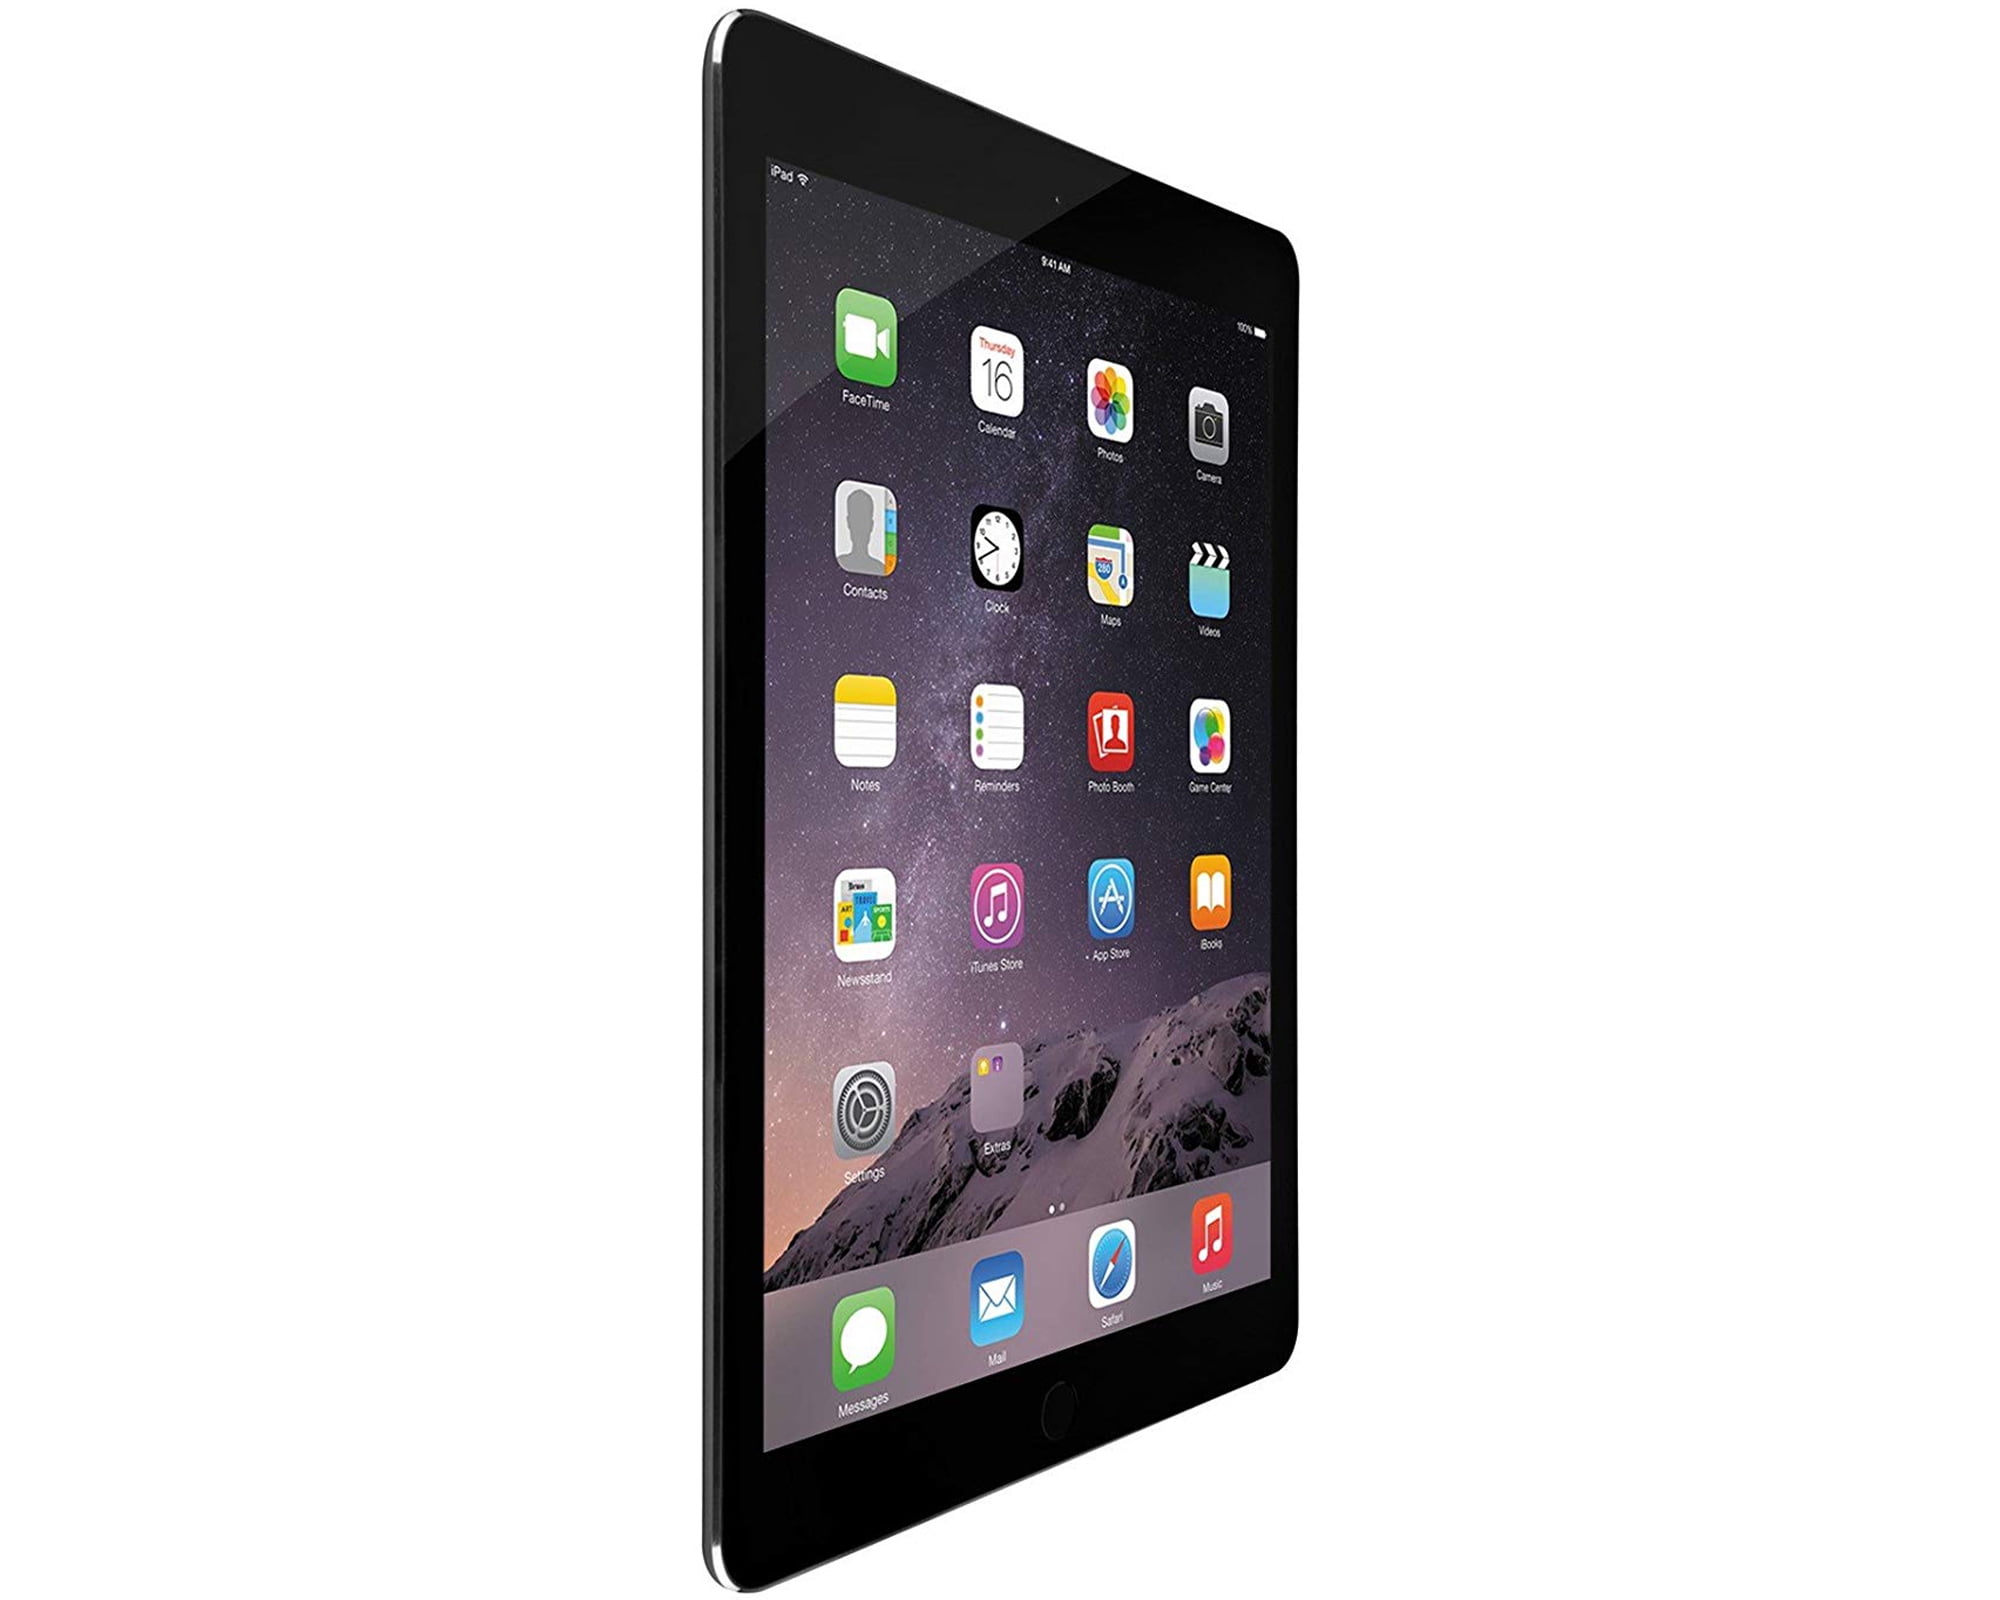 Refurbished Apple iPad Air 1st Gen. OR 2nd Gen. 16GB, 32GB, 64GB, 128GB,  Wi-Fi Only, All Colors: Space Gray, Silver, Gold, Includes Bundle, and Free  